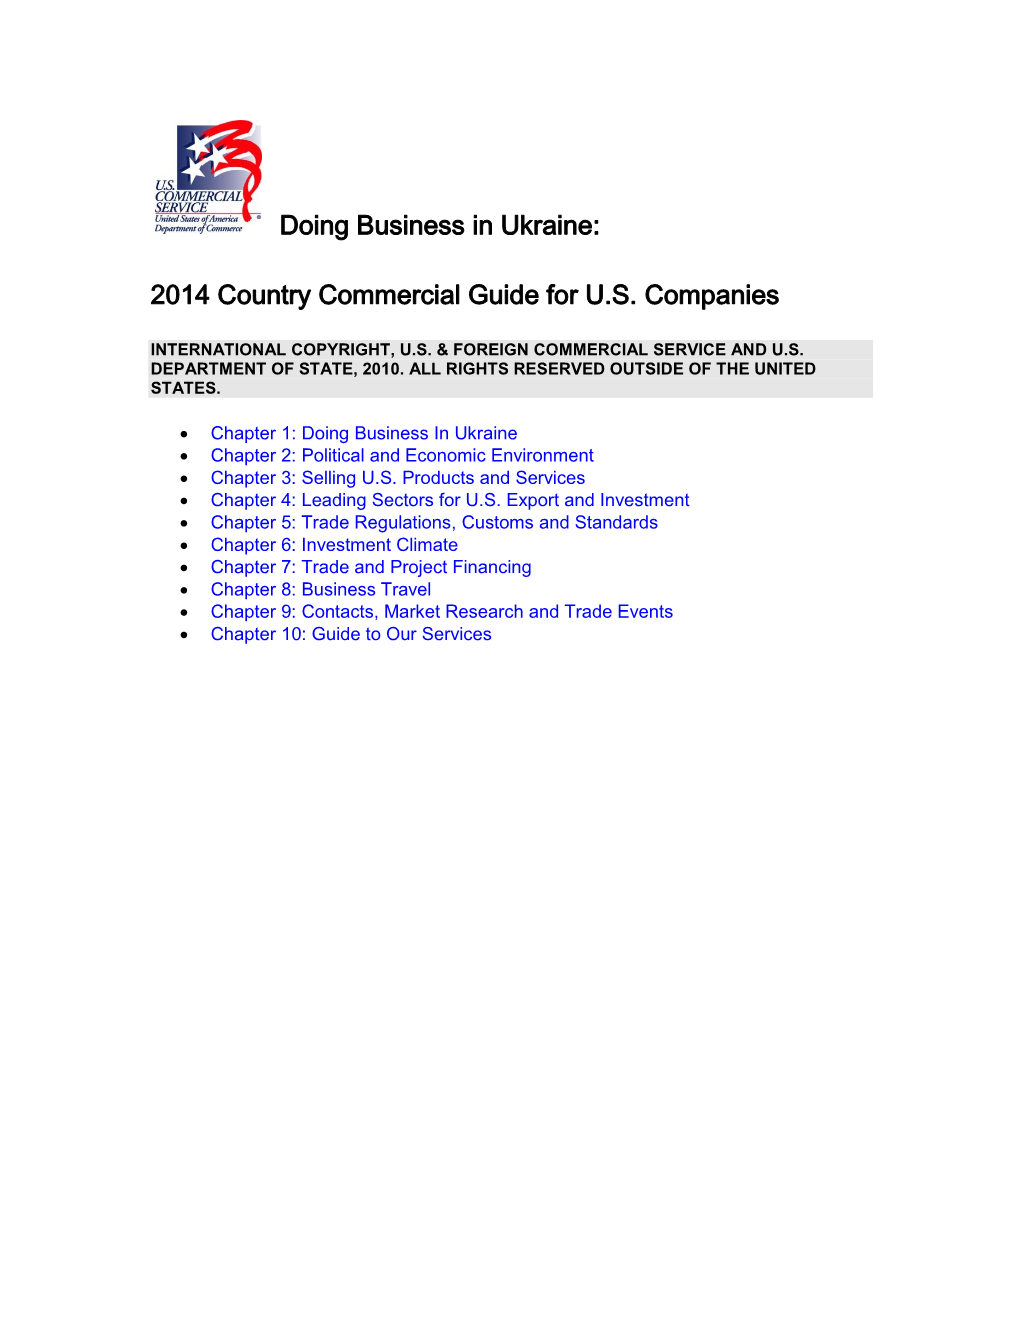 Doing Business in Ukraine: 2014 Country Commercial Guide for U.S